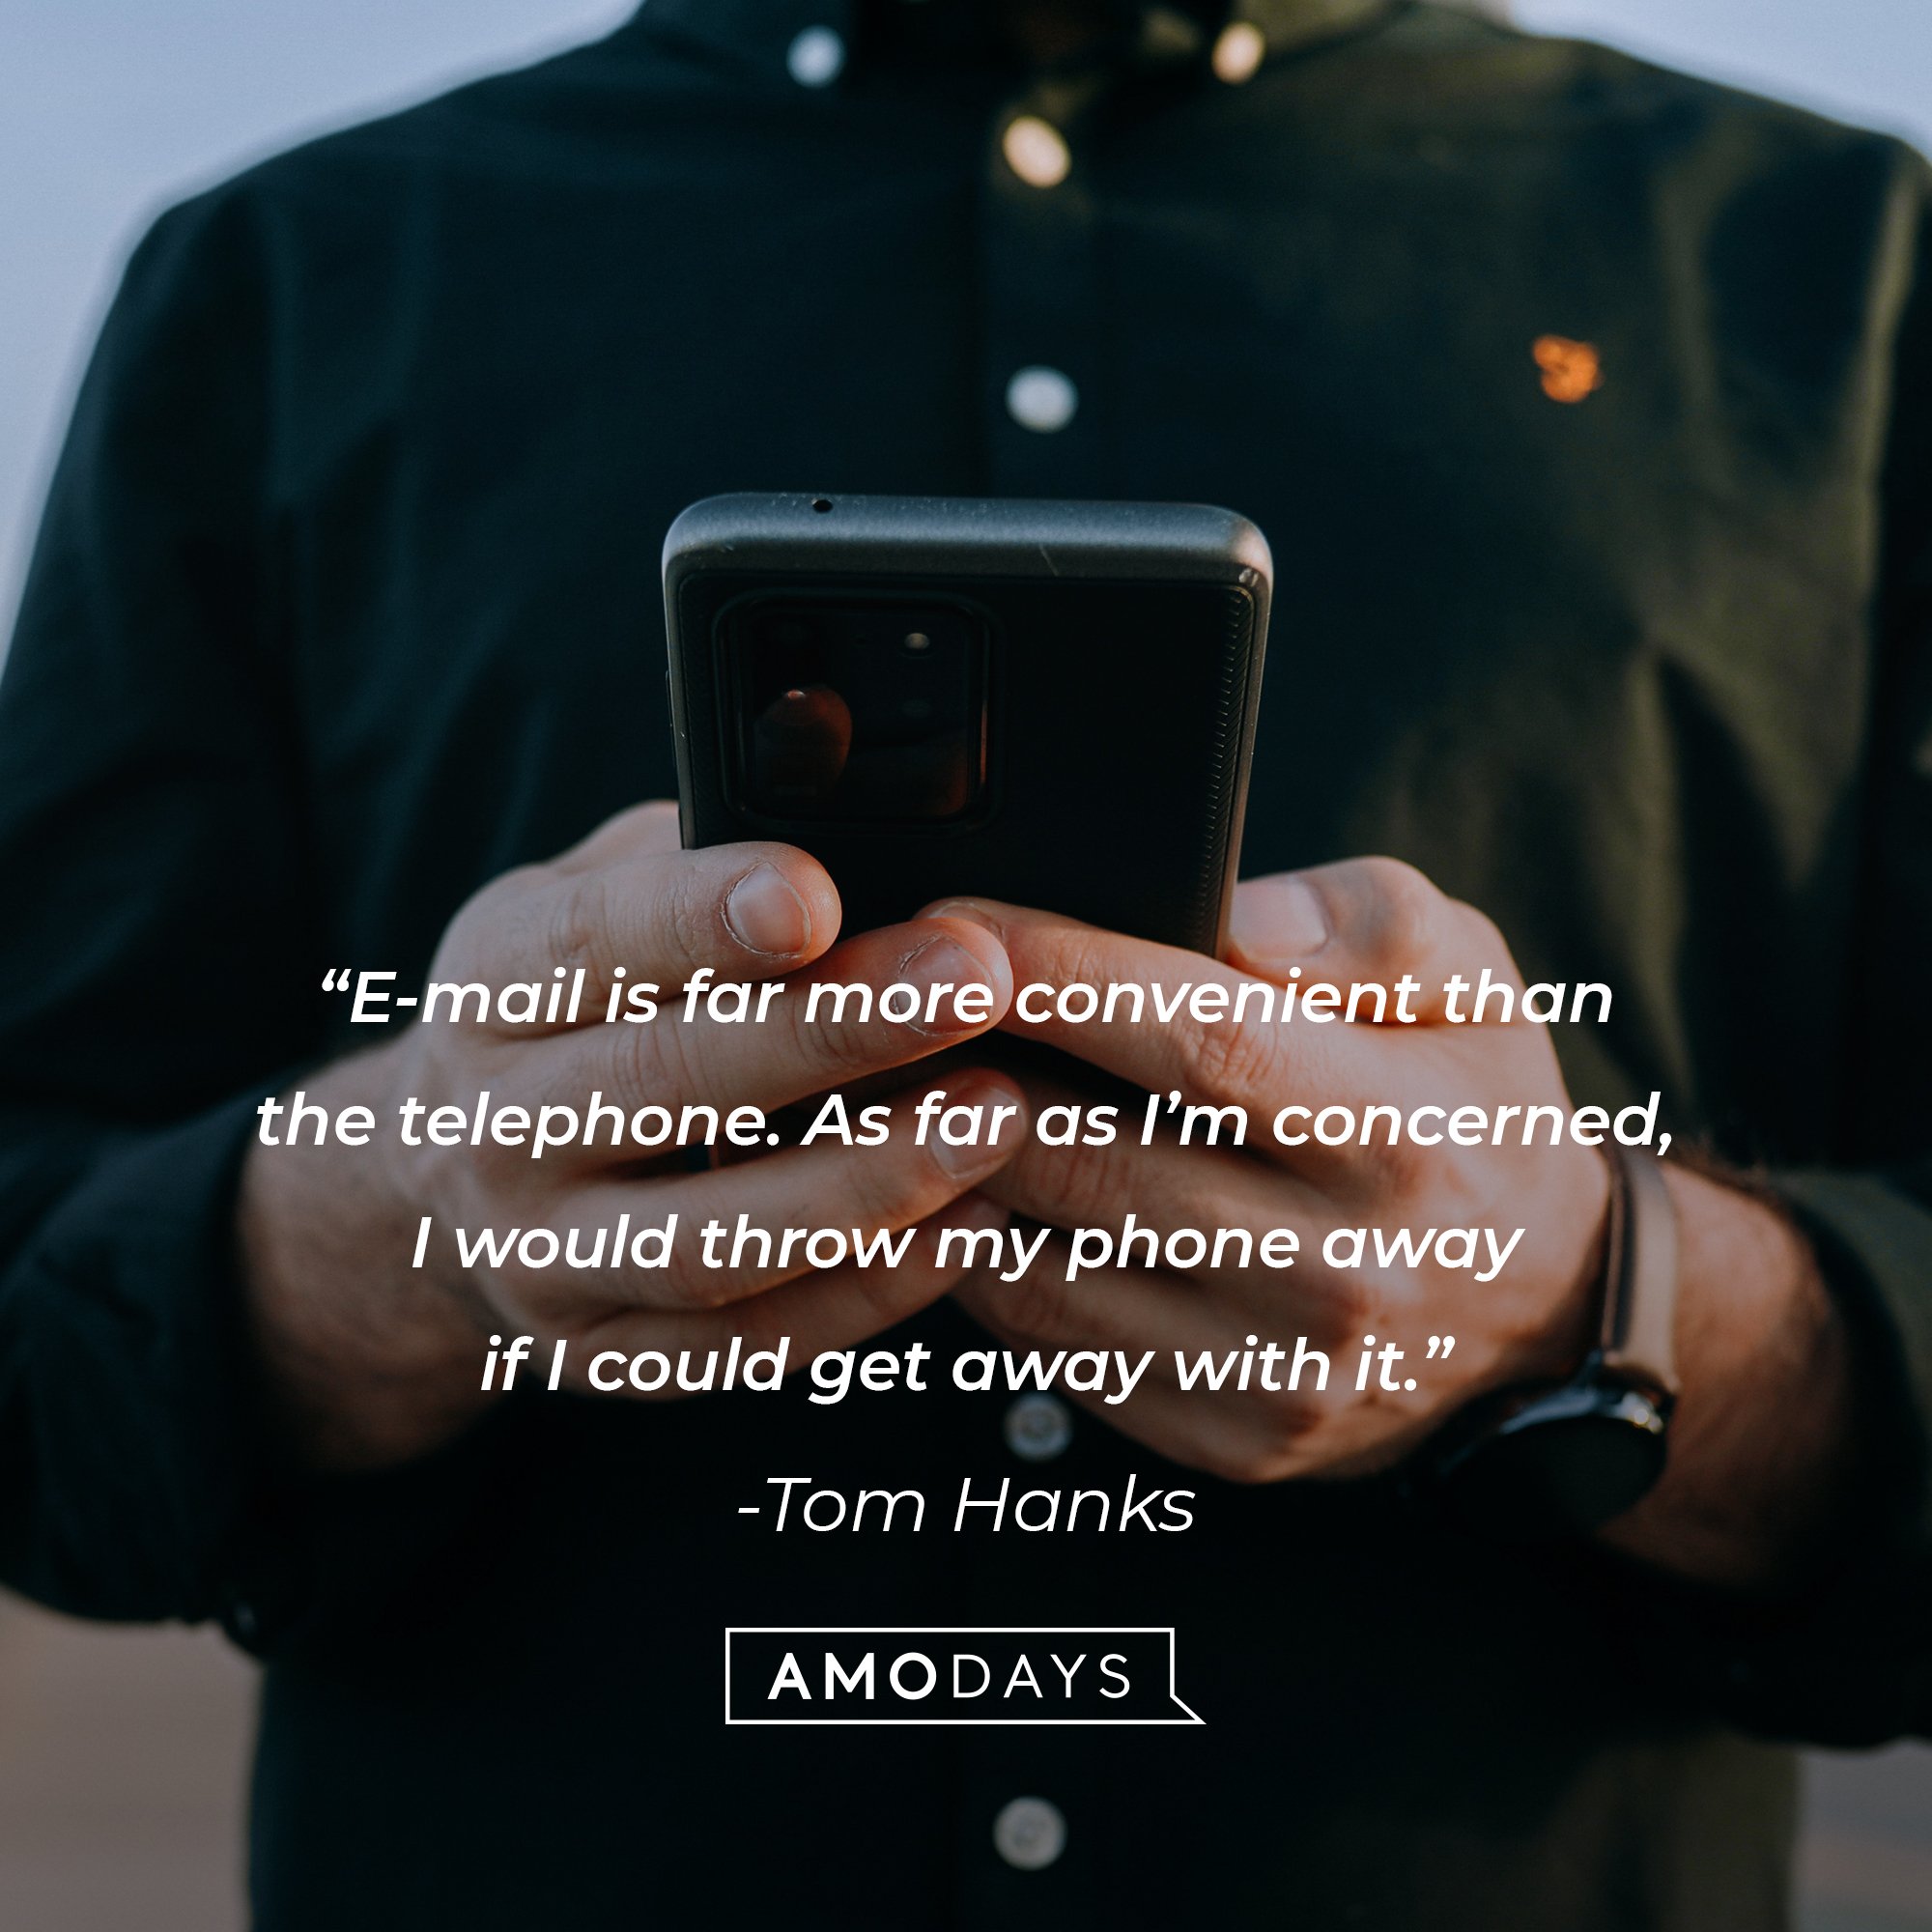  Tom Hanks's quote: “E-mail is far more convenient than the telephone. As far as I’m concerned, I would throw my phone away if I could get away with it.” | Image: AmoDays